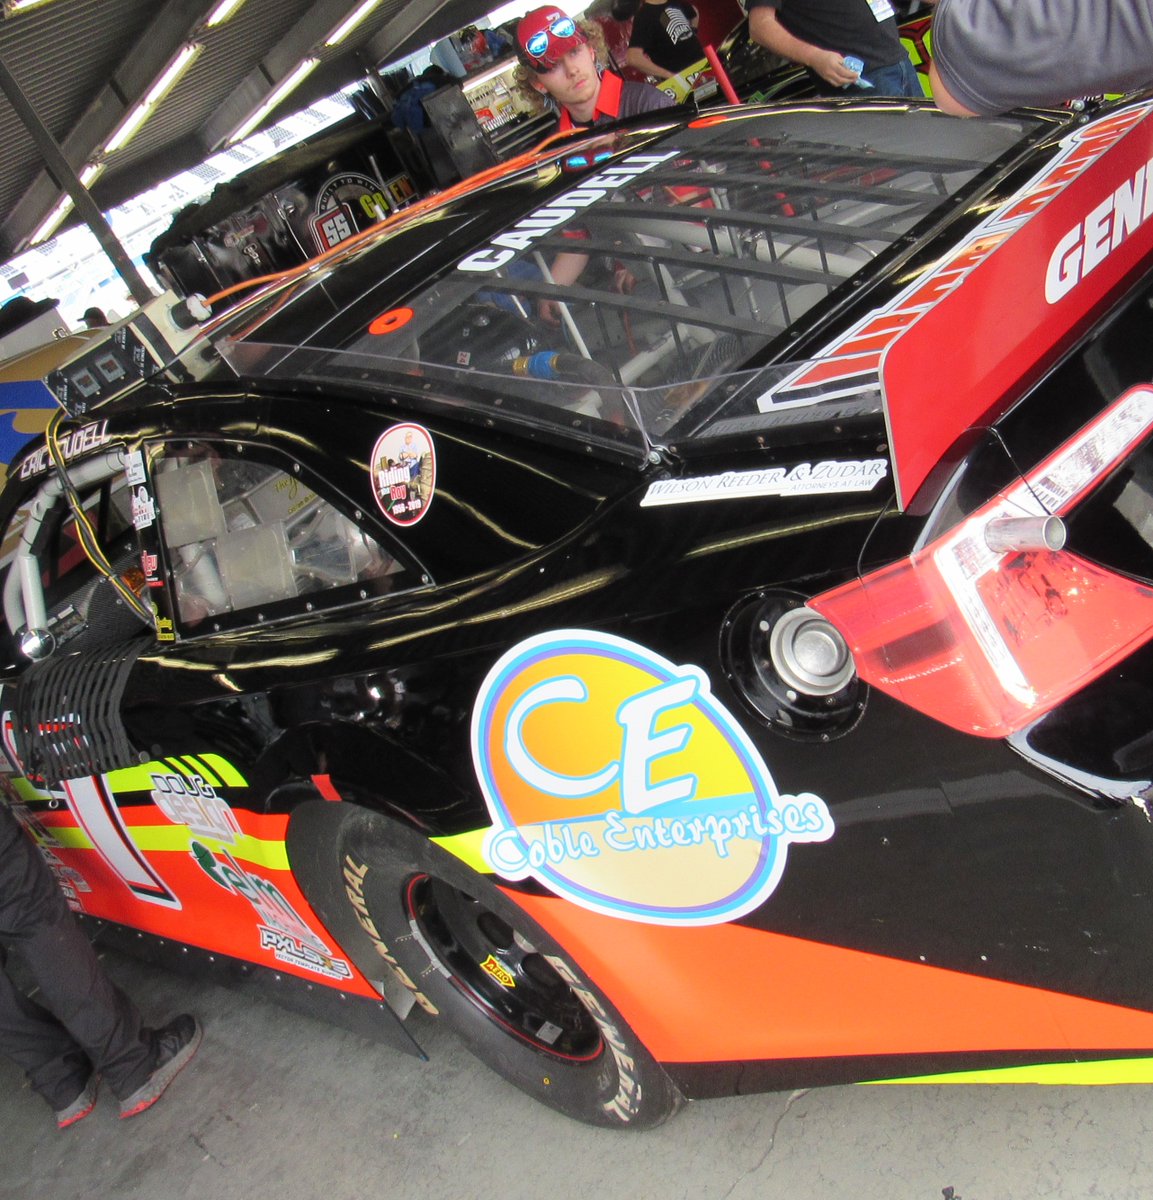 Remember last year's @ARCA_Racing @TALLADEGA? Eric Caudell LED the race with his #7 @CCM_racing Toyota! He has another opportunity this weekend in the #GeneralTire200. Eric will be running his seventh race at this track, the longest oval on the #ARCA circuit.